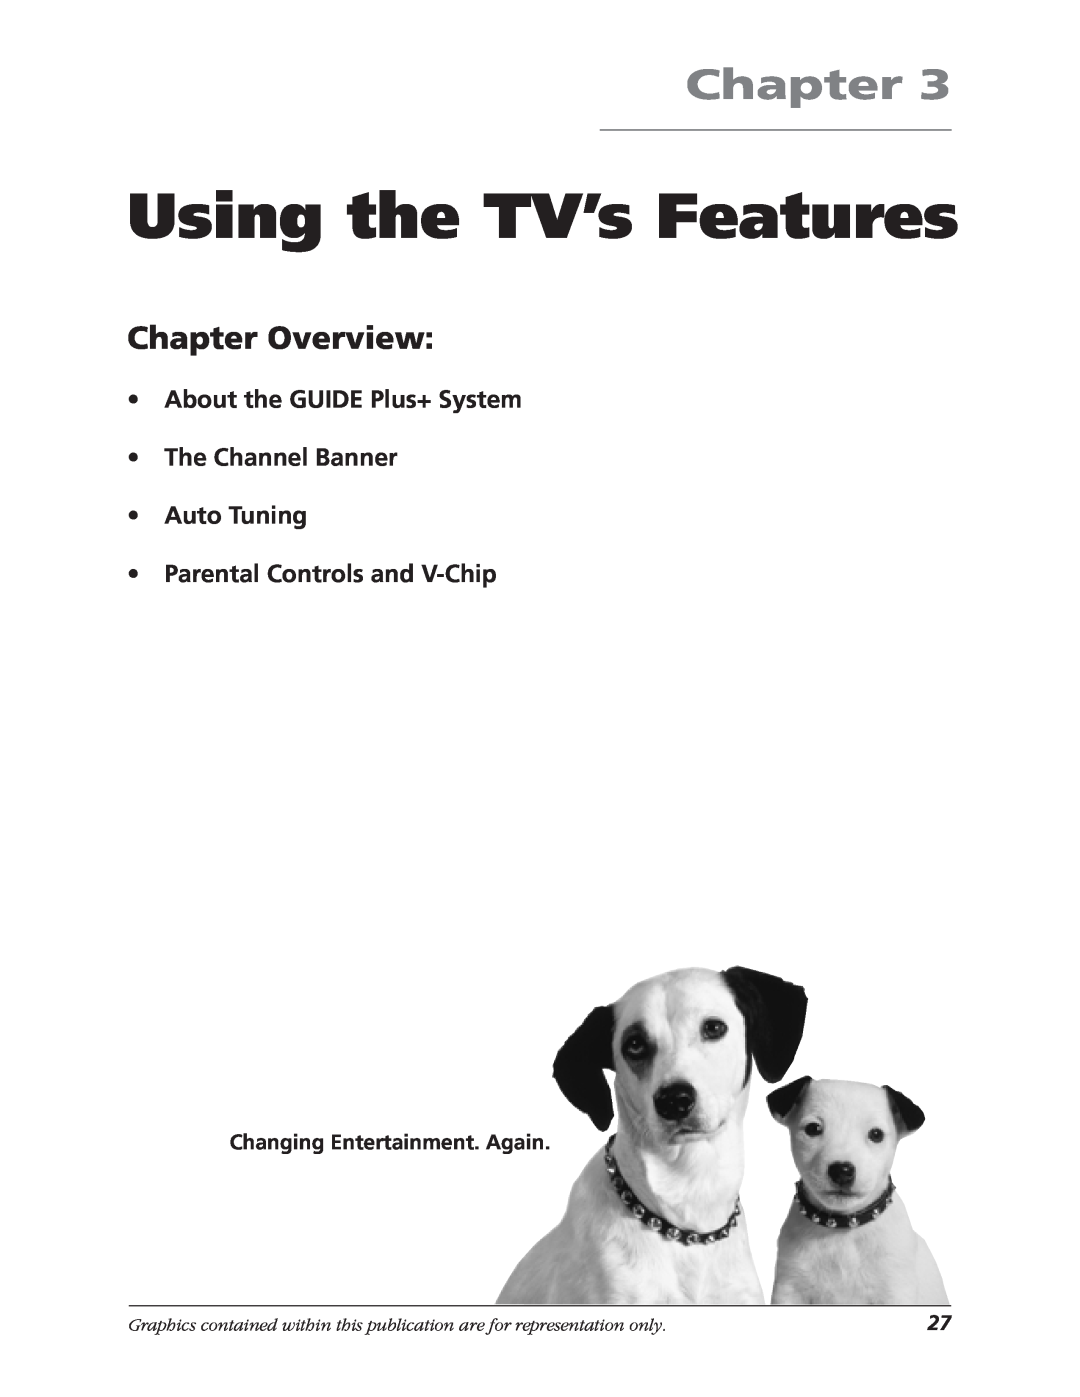 RCA MR68TF700 manual Using the TV’s Features, About the GUIDE Plus+ System The Channel Banner Auto Tuning, Chapter 